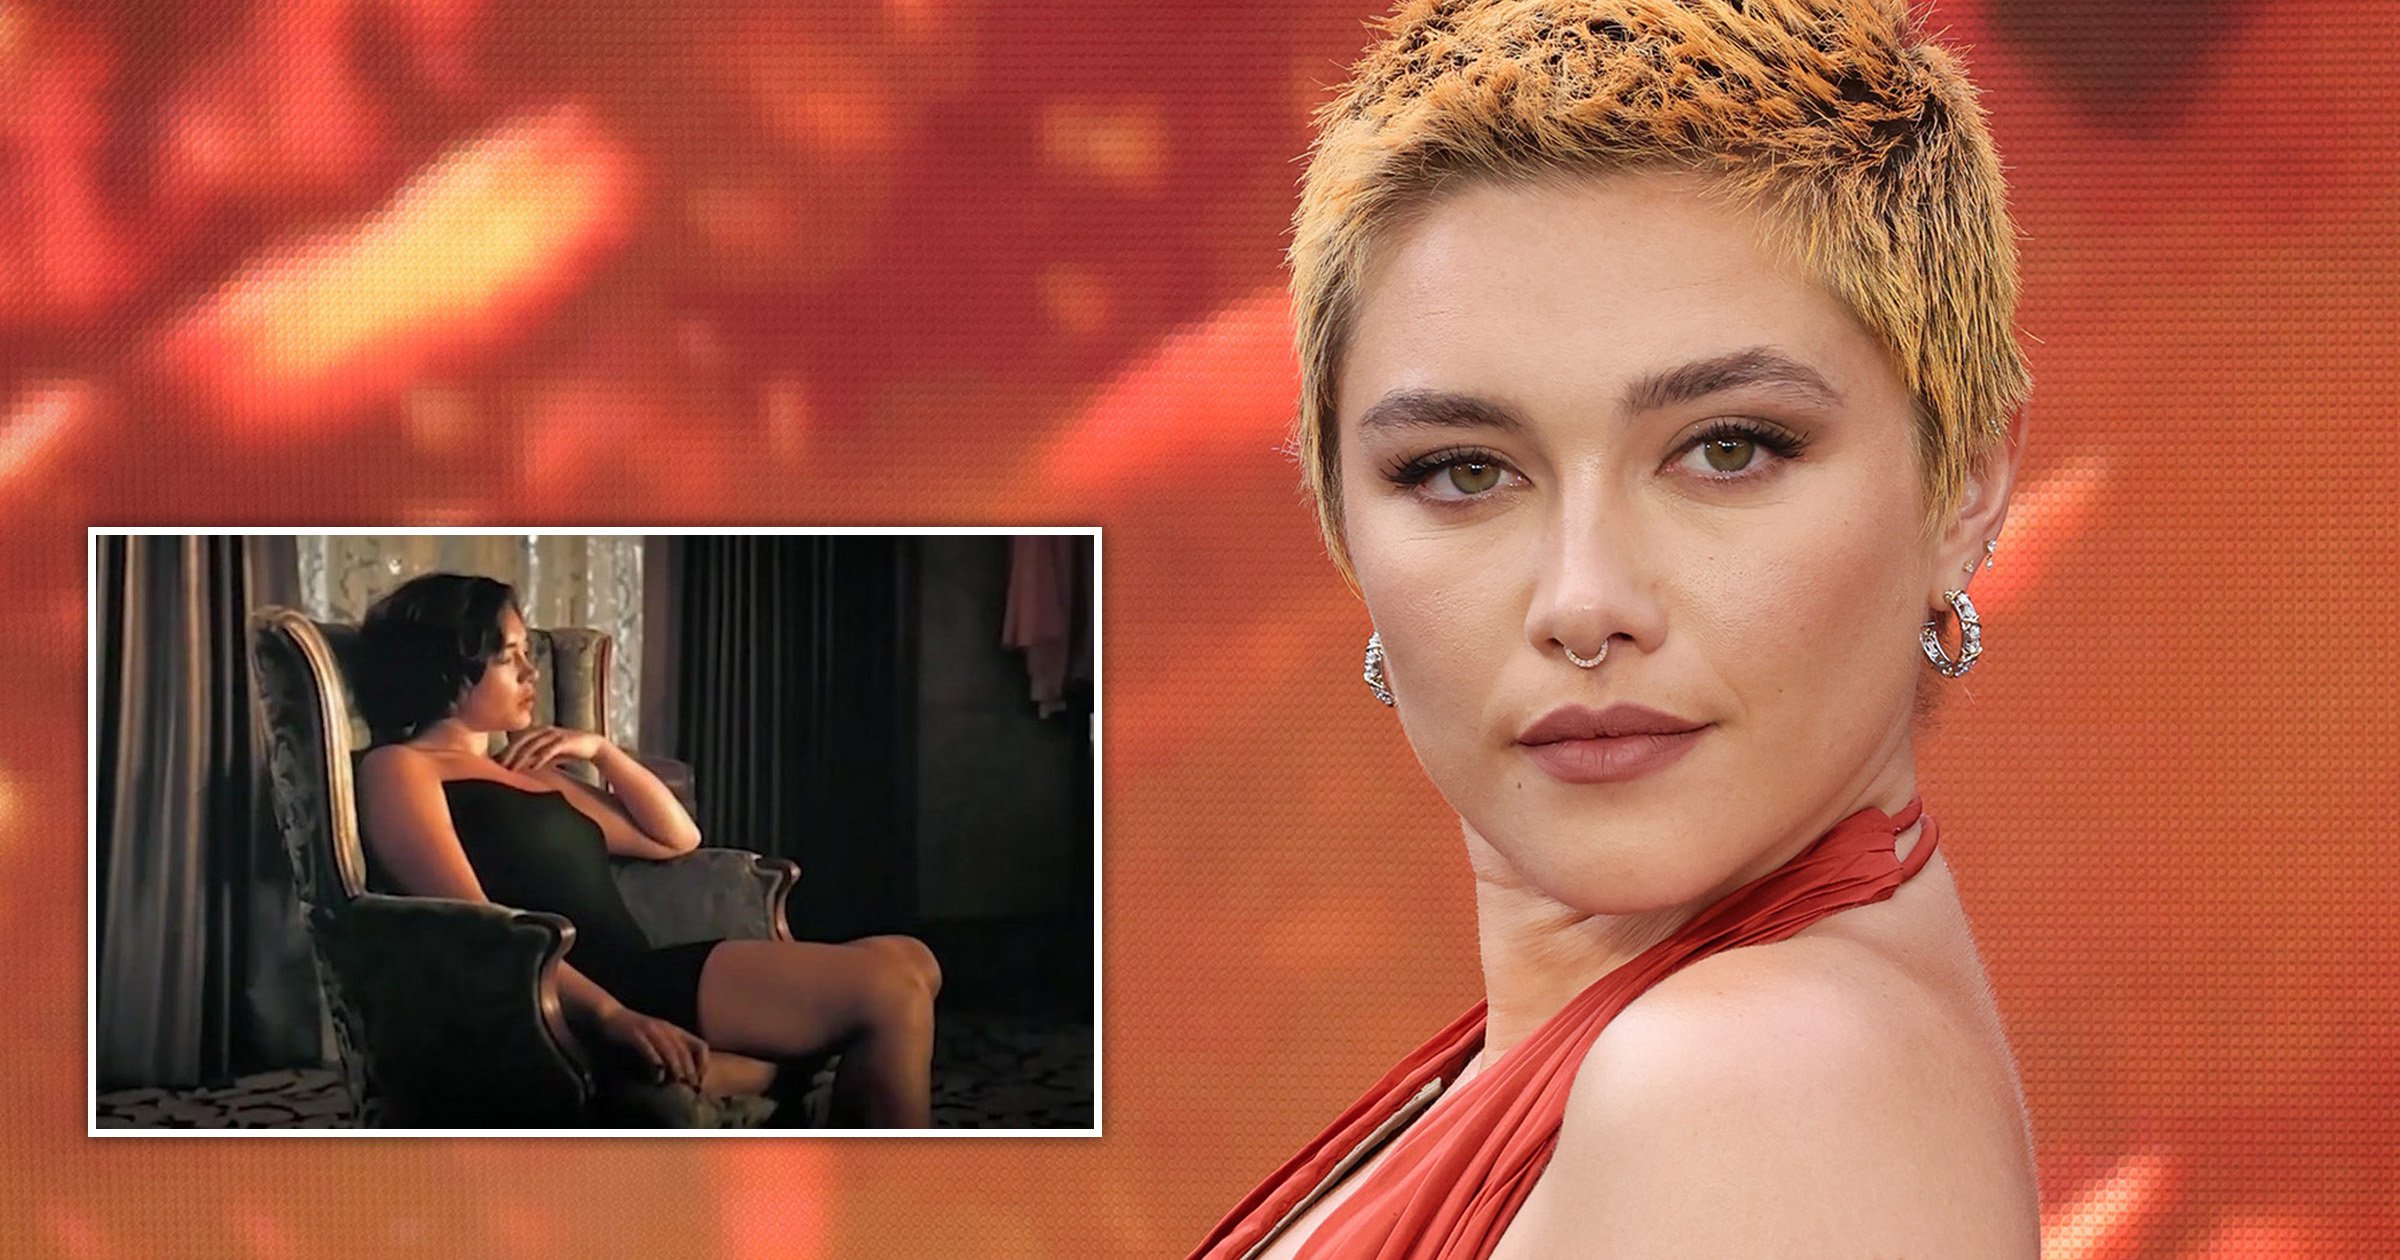 dang khanh nguyen recommends florence pugh boobs pic